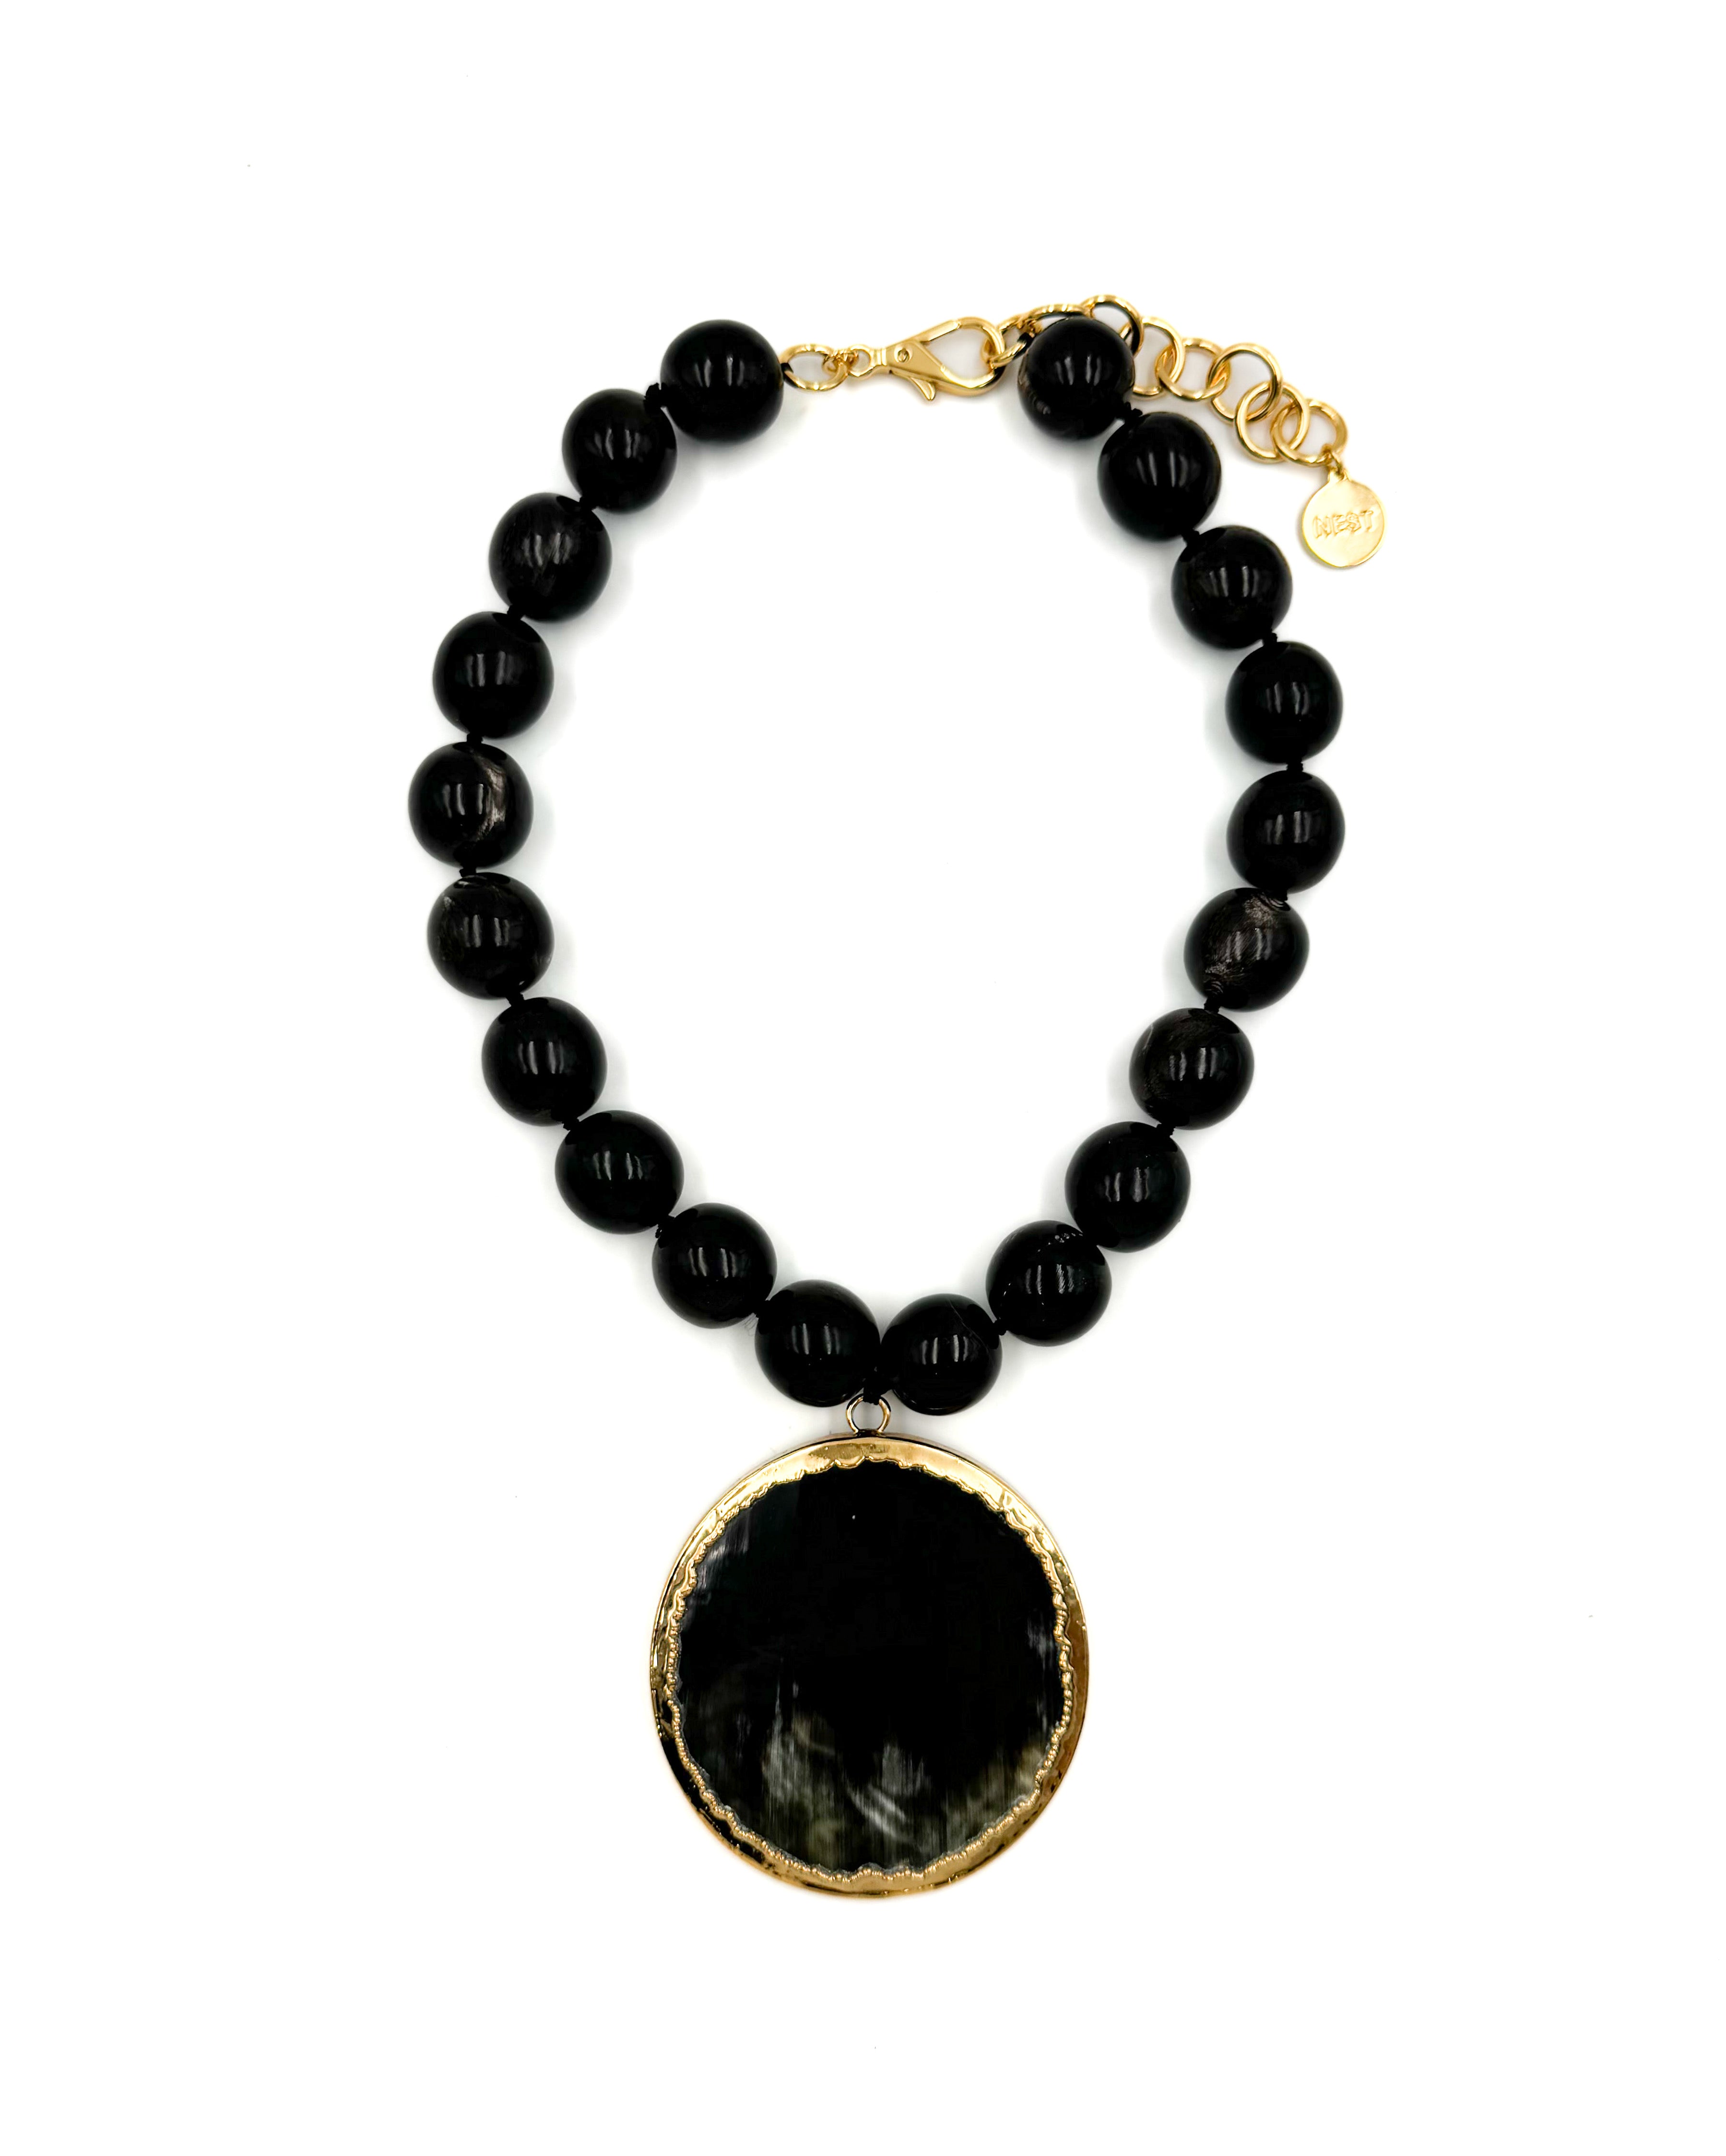 Black Horn Beaded Necklace with Gold Trimmed Pendant